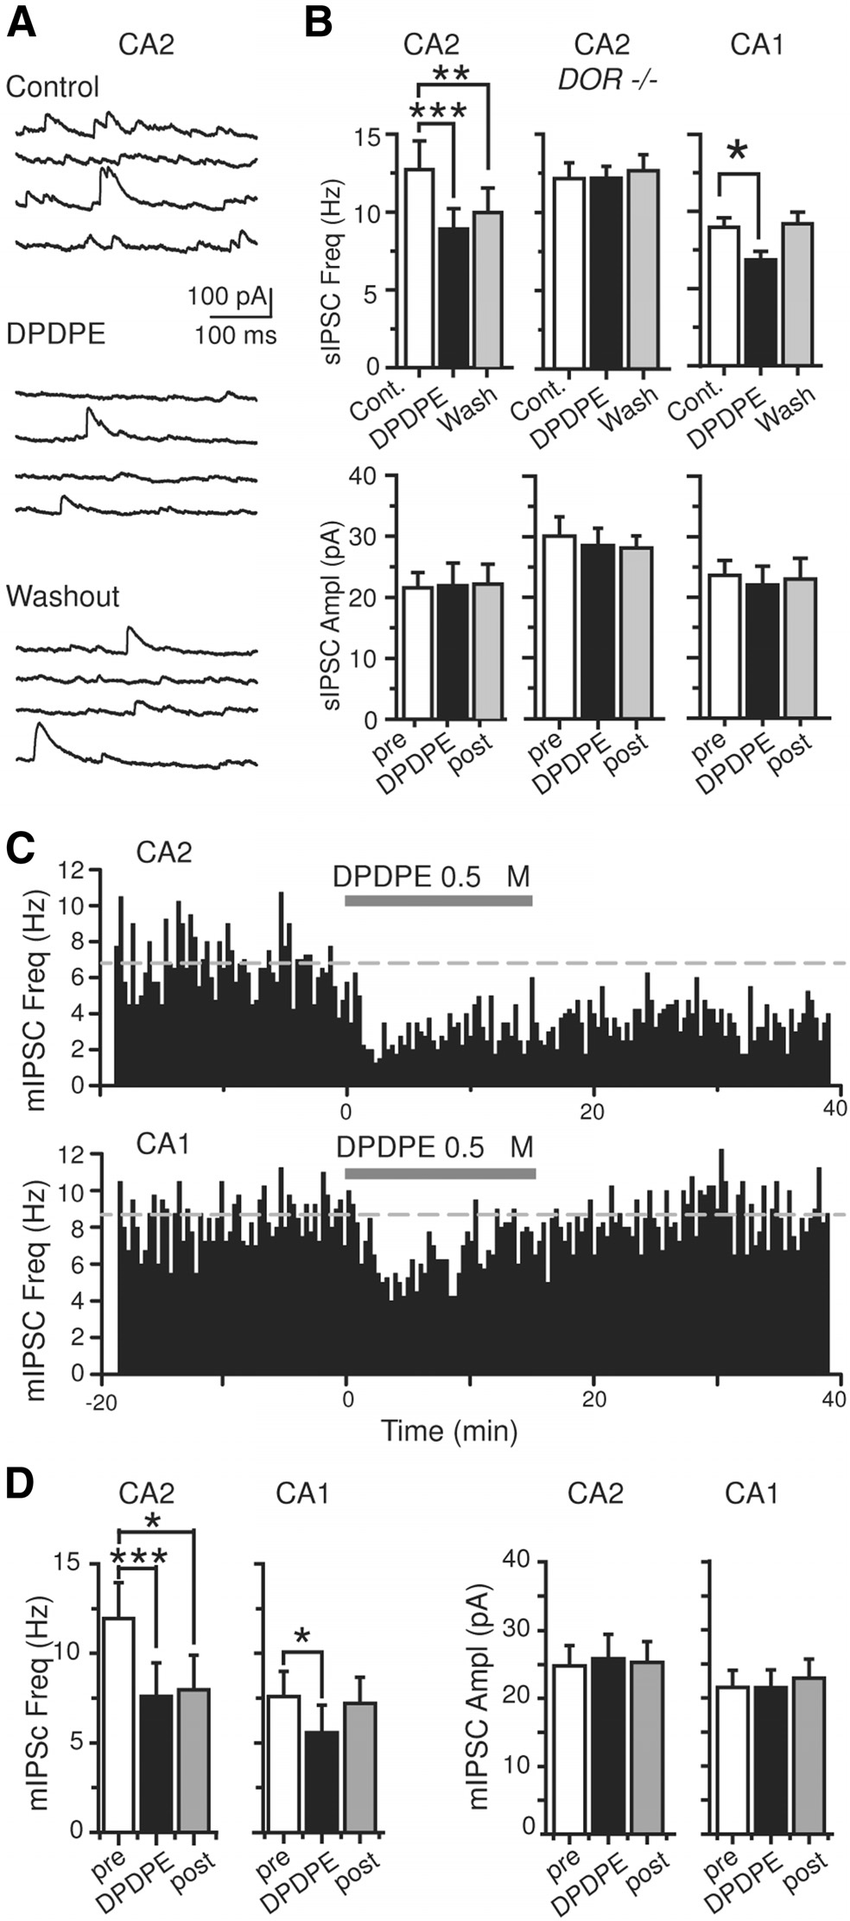 The time course of DOR action on GABA release differs between CA1 and CA2. A, Sample traces of spontaneous IPSCs recorded in a CA2 pyramidal neuron before, during the application, and after the washout of 0.5 M DPDPE. B, Histograms summarizing the effect of DPDPE on sIPSC frequency and amplitude in CA2 PCs from control and DOR KO mice and for control mice in CA1 (n 8 for CA2 controls, n 4 for CA2 DOR KO and n 4 for CA1). C, Single example experiment showing the time course of the effect of DPDPE on miniature IPSCs frequency in CA2 and CA1 pyramidal neurons. Whereas mIPSC frequency is decreased following washout of DPDPE in CA2, a complete recovery of mIPSC frequency is observed in CA1. Dashed line marks average baseline frequency. D, Summary histograms of the effect of DPDPE on mIPSC frequency and amplitude in CA1 and CA2 pyramidal neurons (n 5 for CA2 and for CA1). *p 0.05, **p 0.01, ***p 0.001. Error bars show SEM.